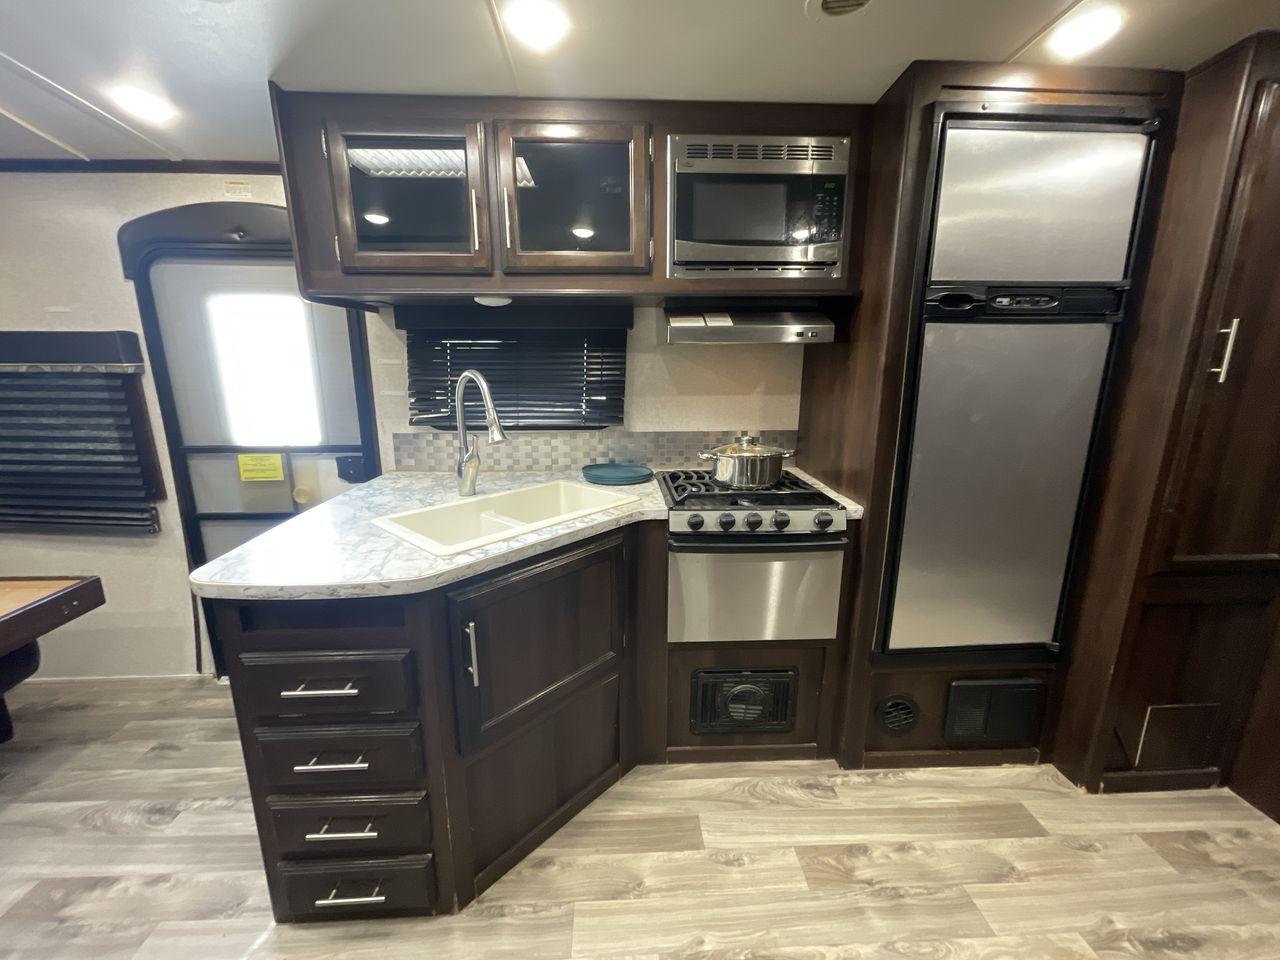 2018 WHITE JAYCO JAY FLIGHT 23MRB (1UJBJ0BN5J1) , Length: 28.17 ft | Dry Weight: 5,560 lbs. | Gross Weight: 7,250 lbs. | Slides: 1 transmission, located at 4319 N Main Street, Cleburne, TX, 76033, (817) 221-0660, 32.435829, -97.384178 - The 2018 Jayco Jay Flight 23MRB is a travel trailer that encapsulates both compactness and luxury for unparalleled camping experiences. Spanning 28 feet in length, this model boasts a thoughtfully arranged interior featuring a single slide-out, seamlessly amplifying the living space. The Jay Flight - Photo #10